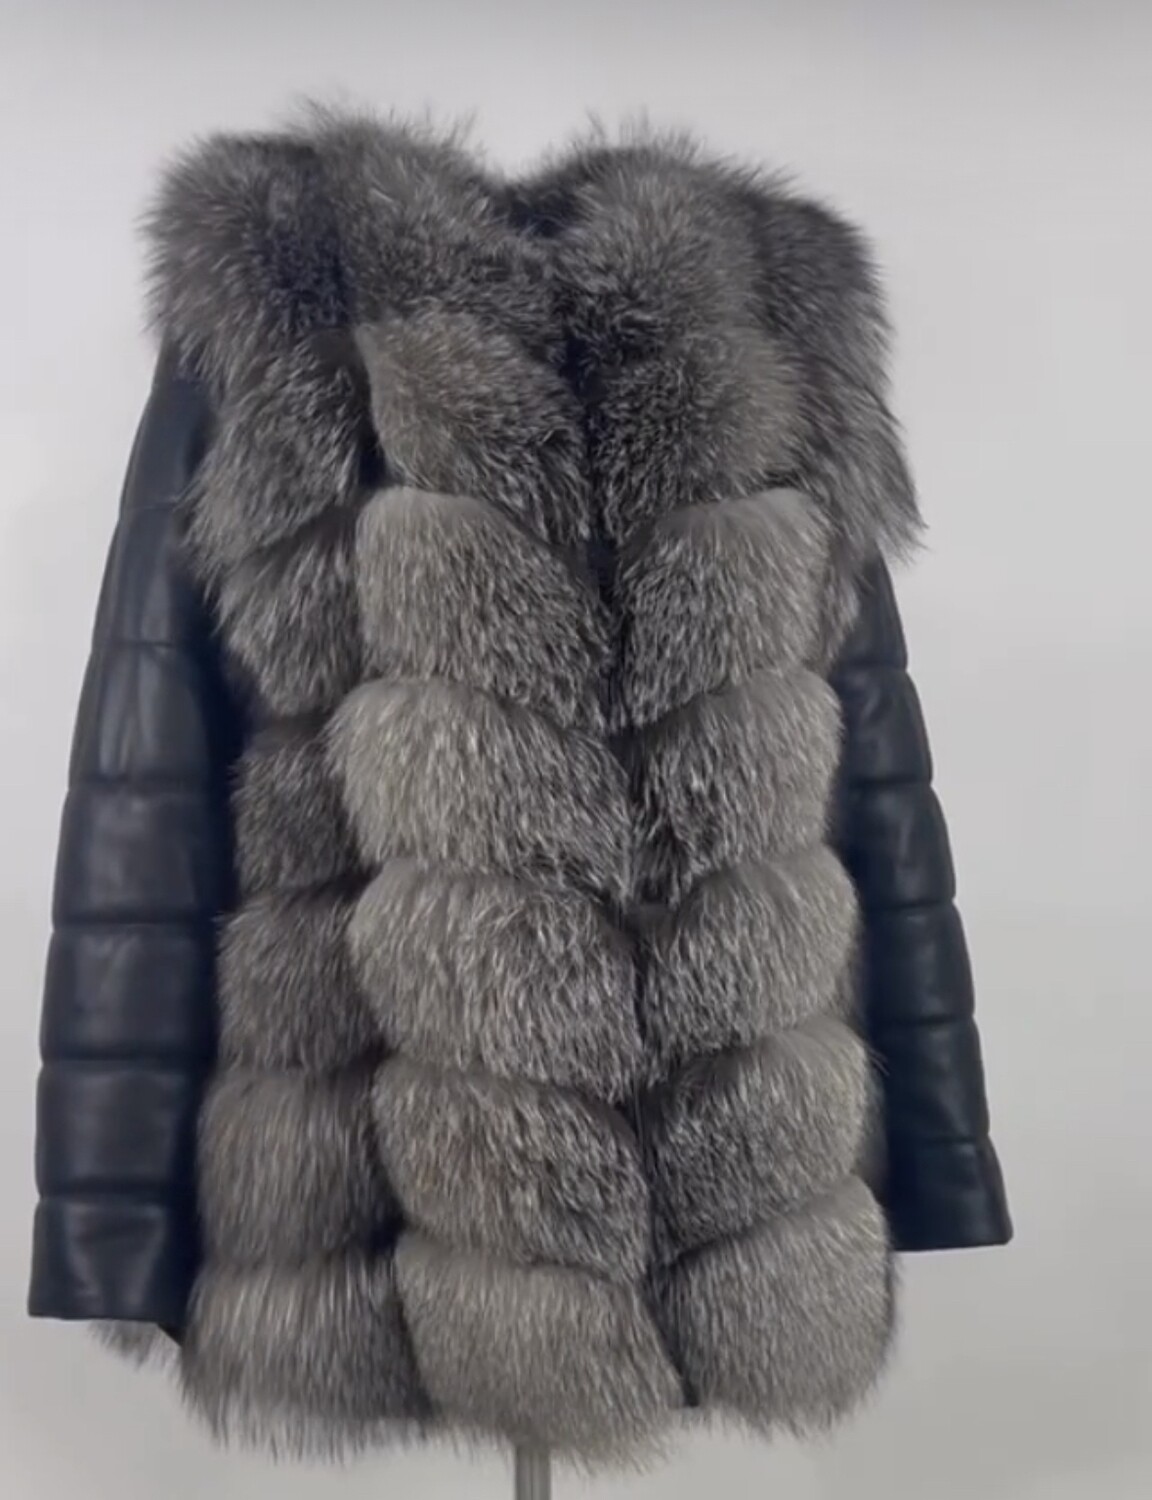 Fur and Outwear | Reading, PA | 610 781-4099